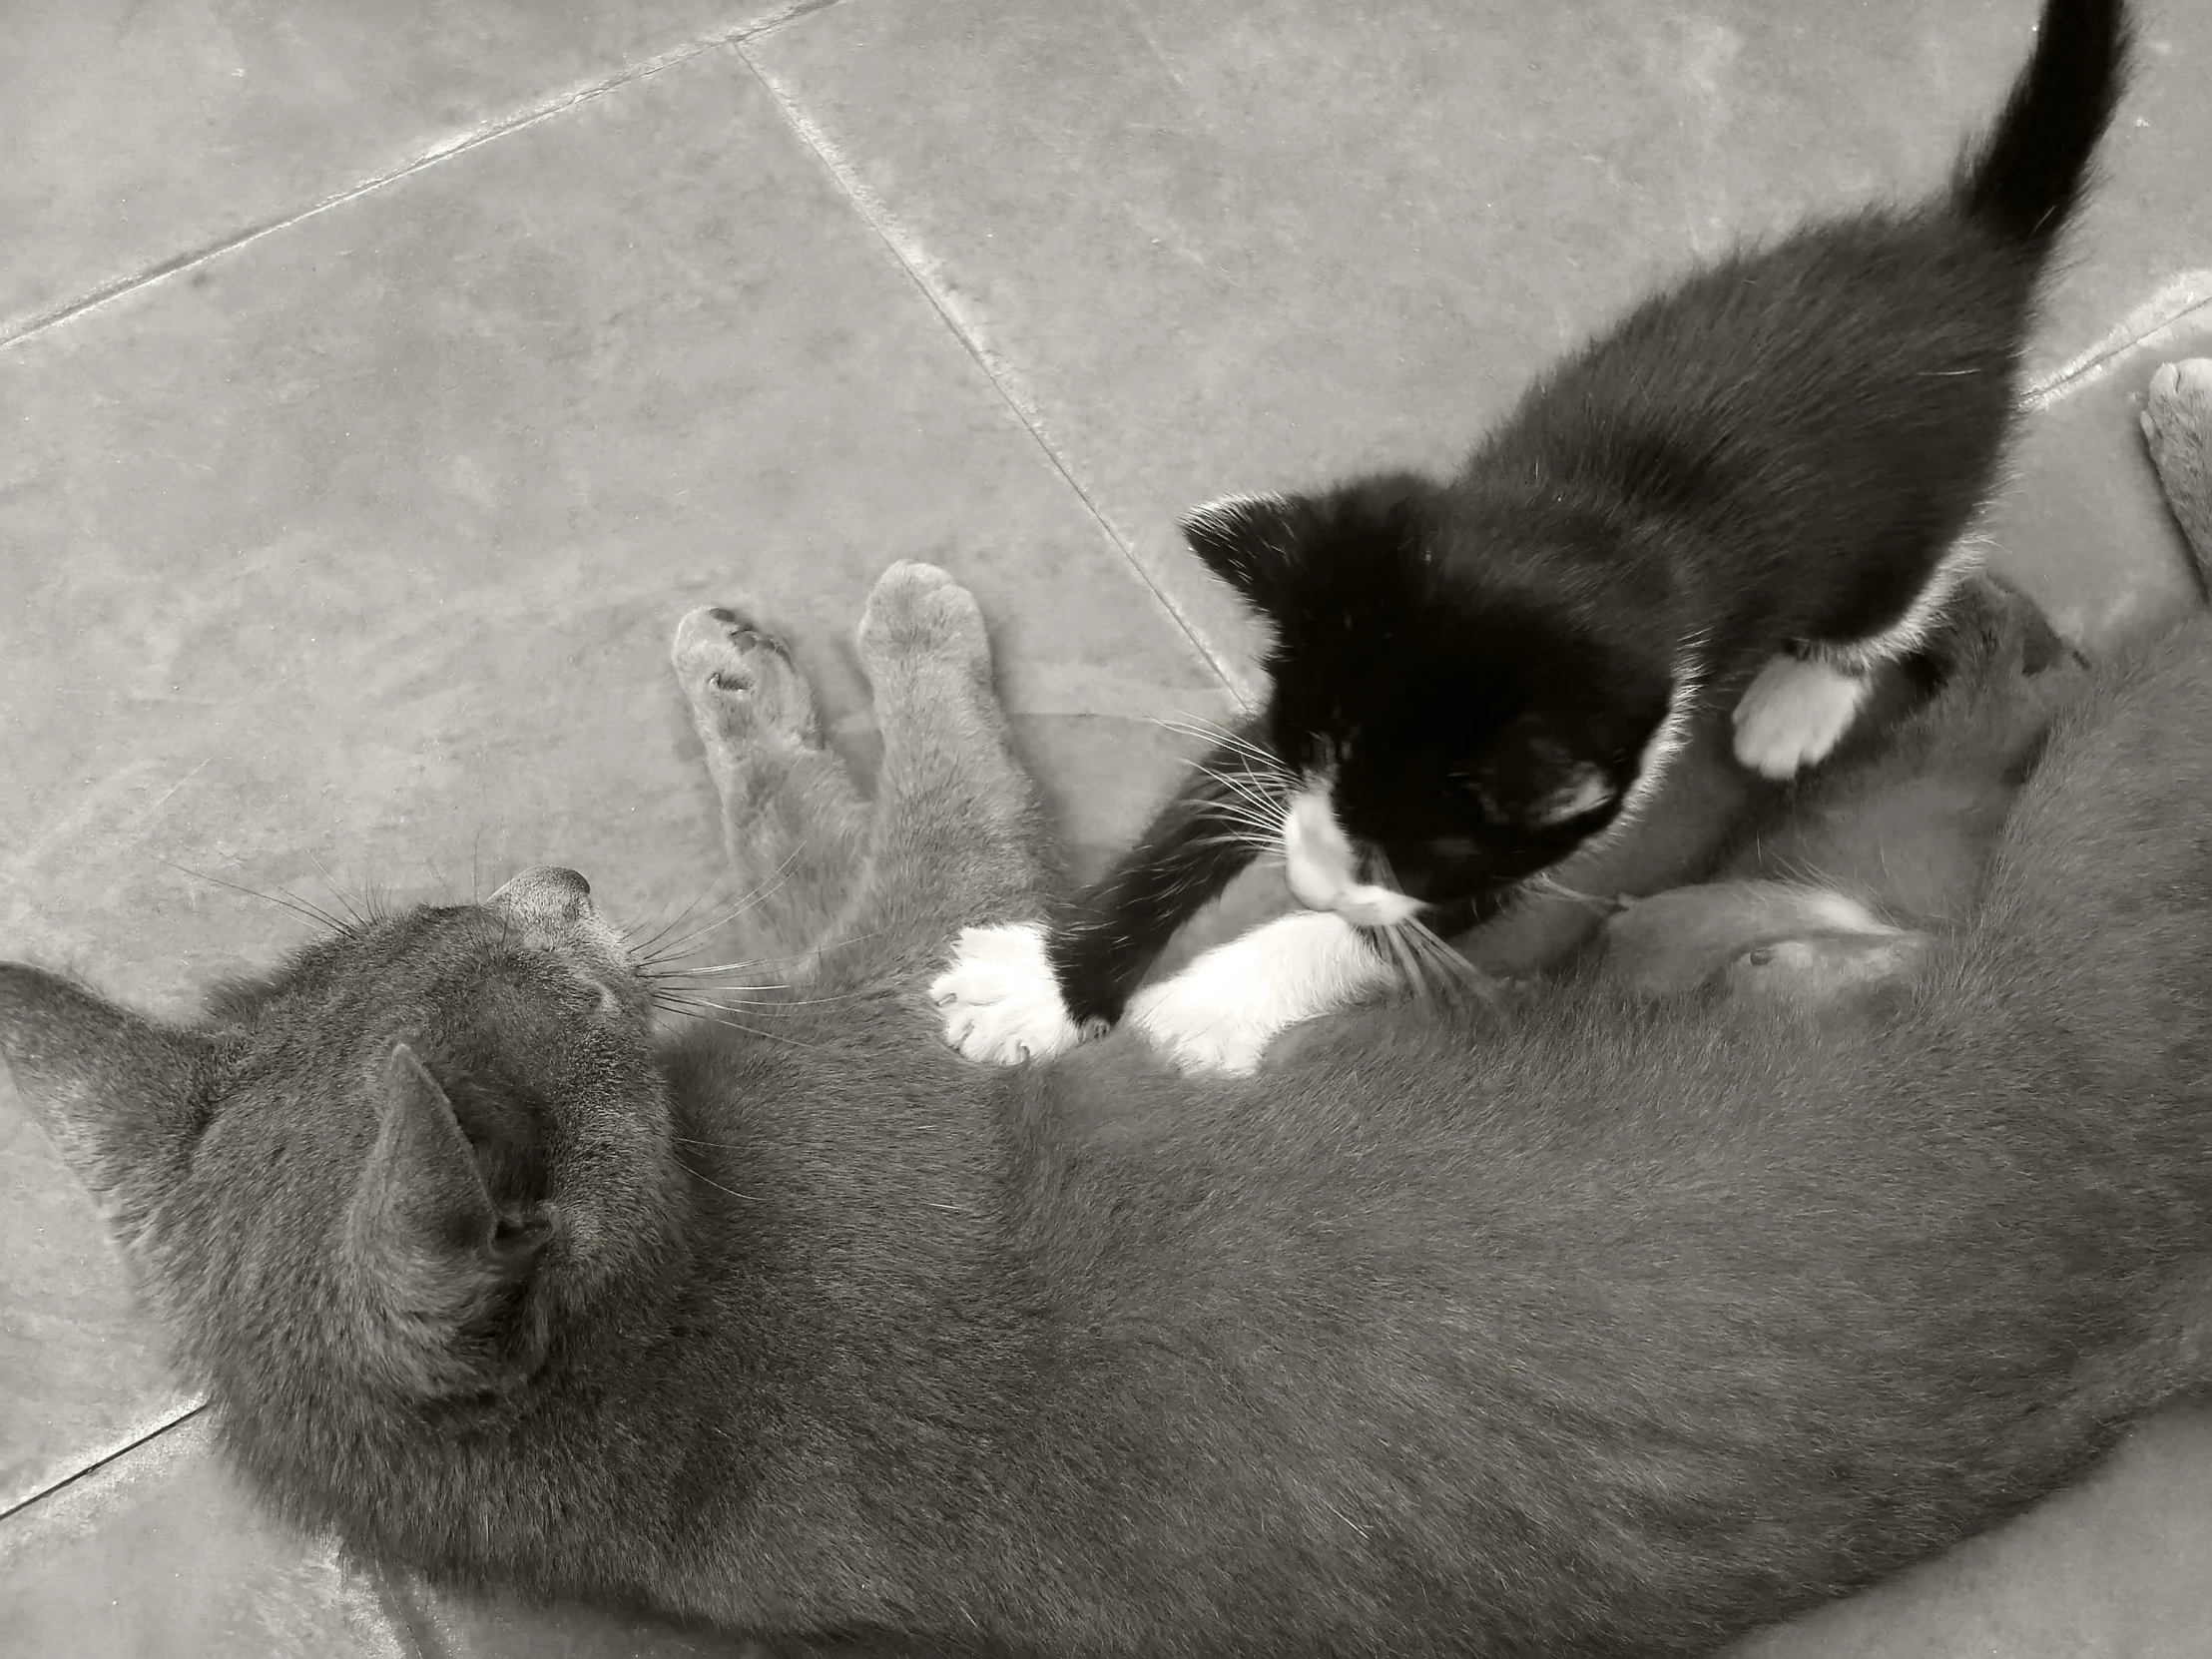 a kitten playing with another kitten on the ground